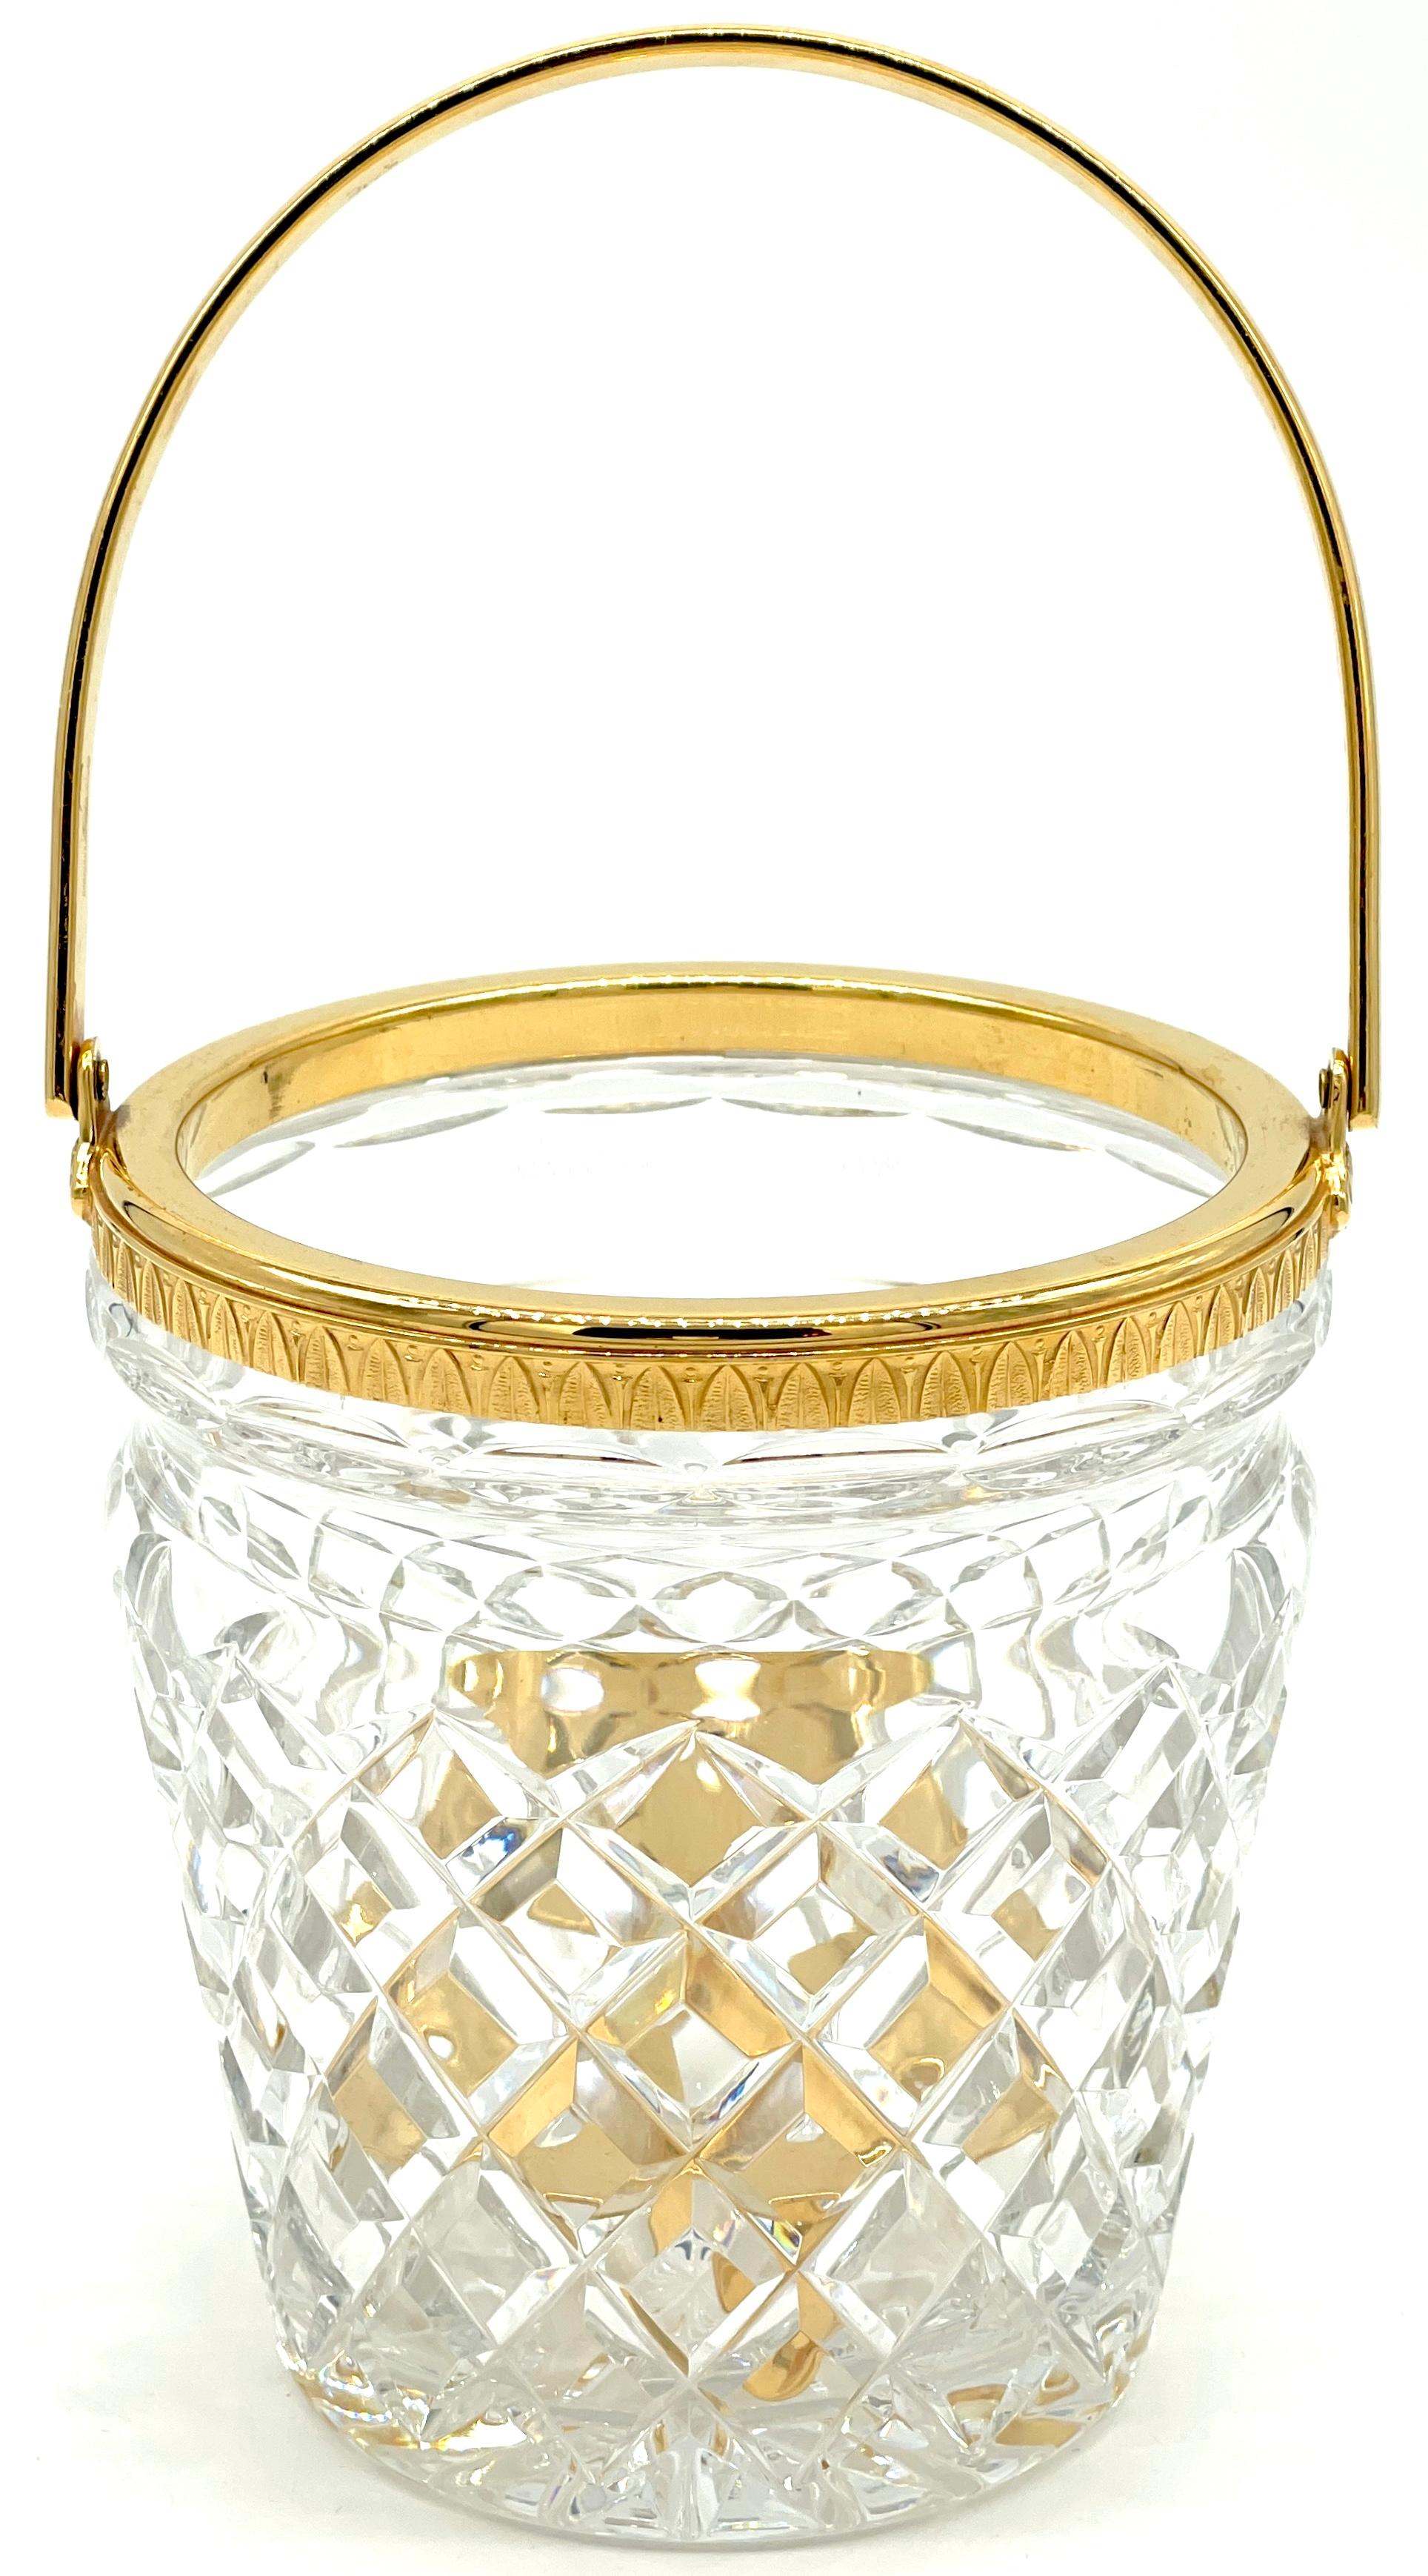 Christofle Neoclassical Cut Crystal Gold Washed Swing-Handled Ice Bucket, With Ice Strainer 
France, circa 1960s

A Exquisite Christofle Neoclassical Cut Crystal Gold Washed Swing-Handled Ice Bucket with Ice Strainer, made in France during the